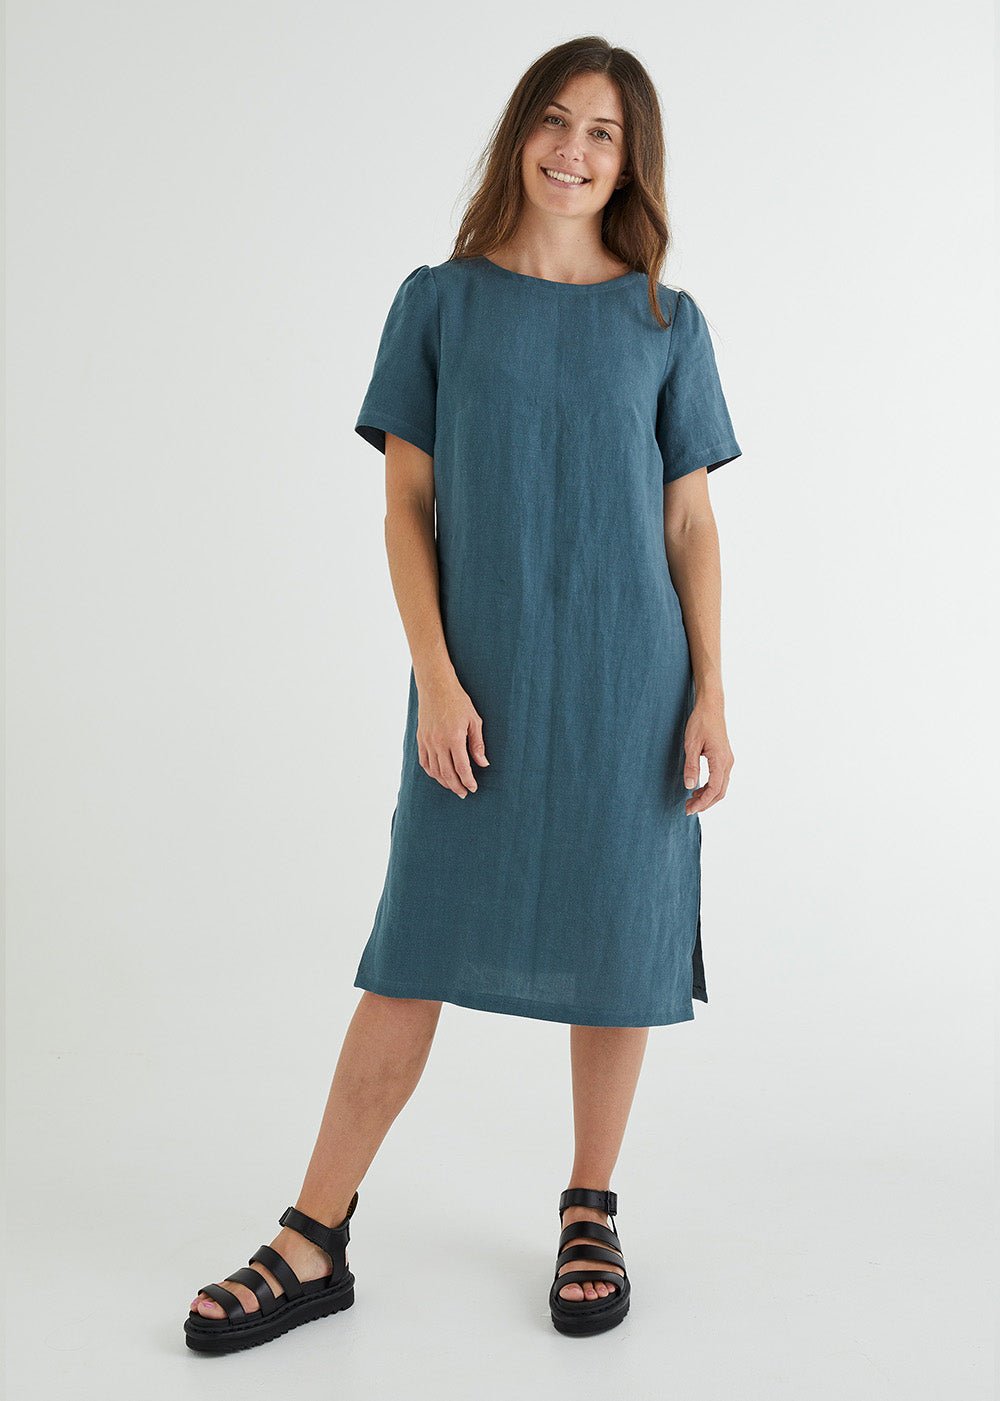 Lucy Linen Dress in Deep Teal-Devina Louise-stride